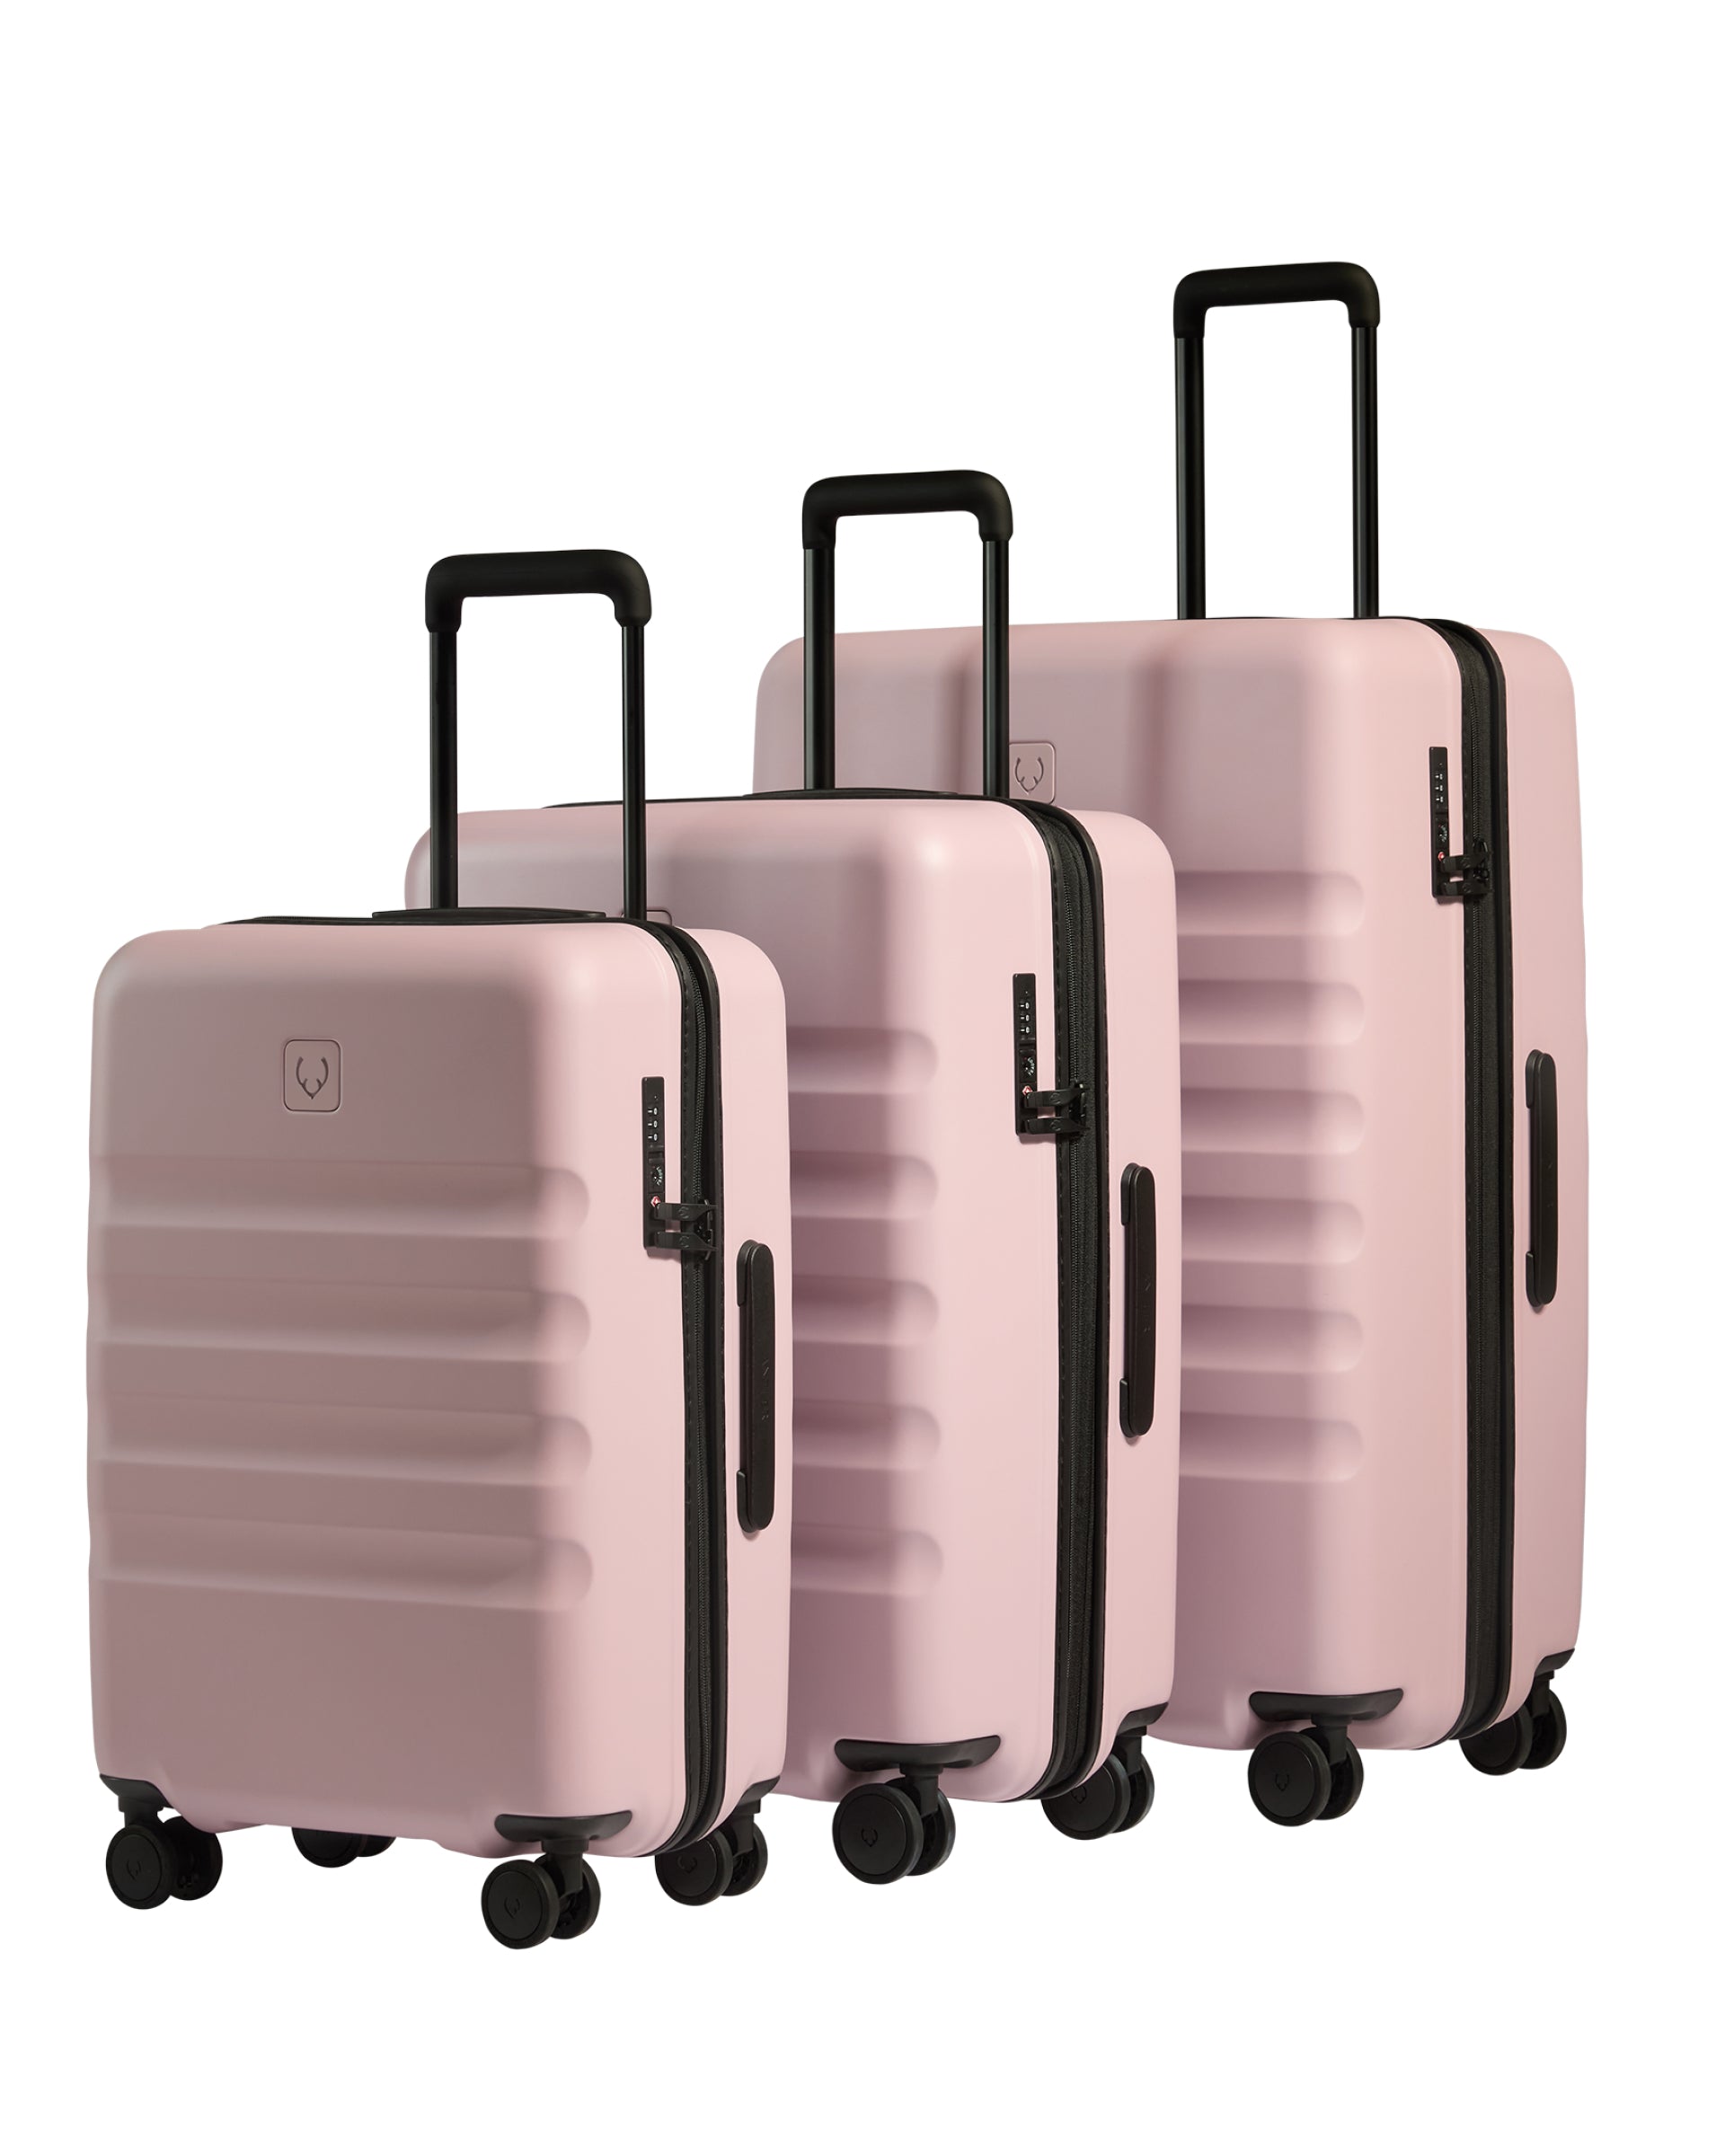 View Antler Icon Stripe Suitcase Set With Biggest Cabin Suitcase In Moorland Pink information